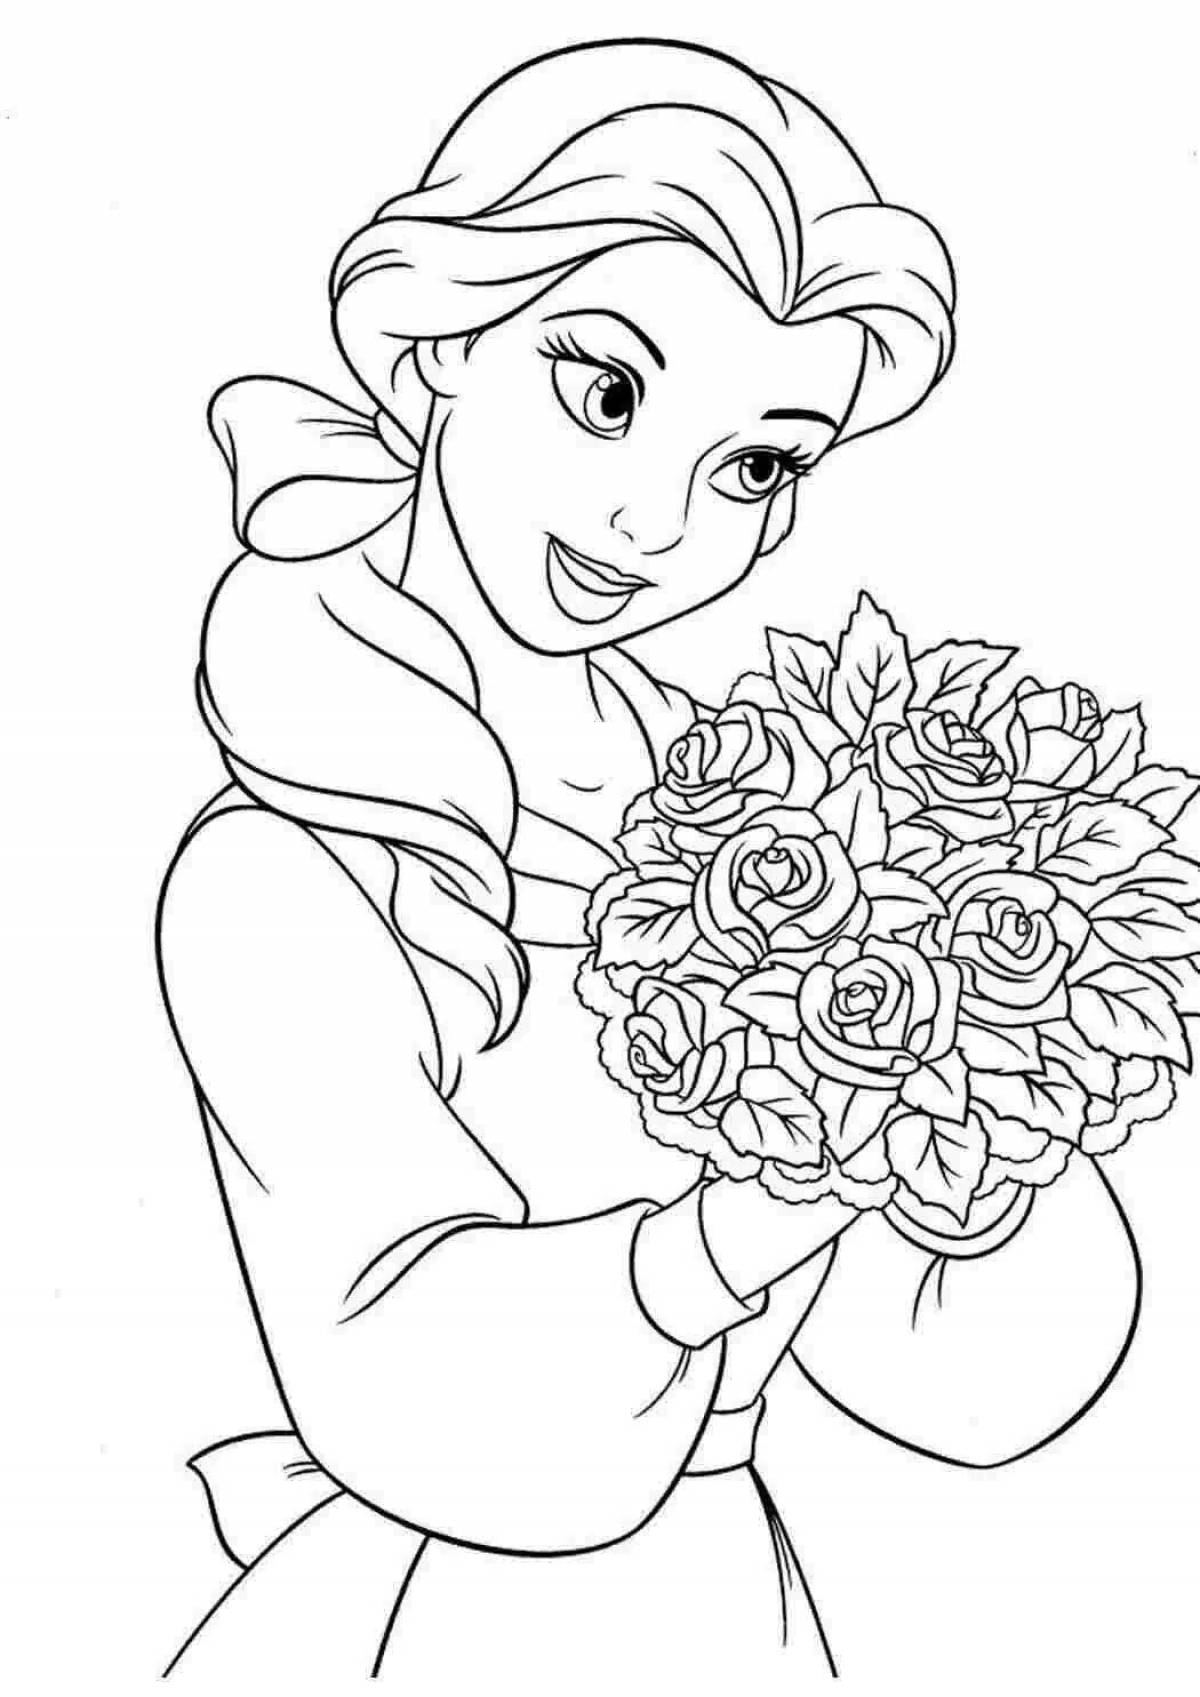 Amazing coloring pages with photos